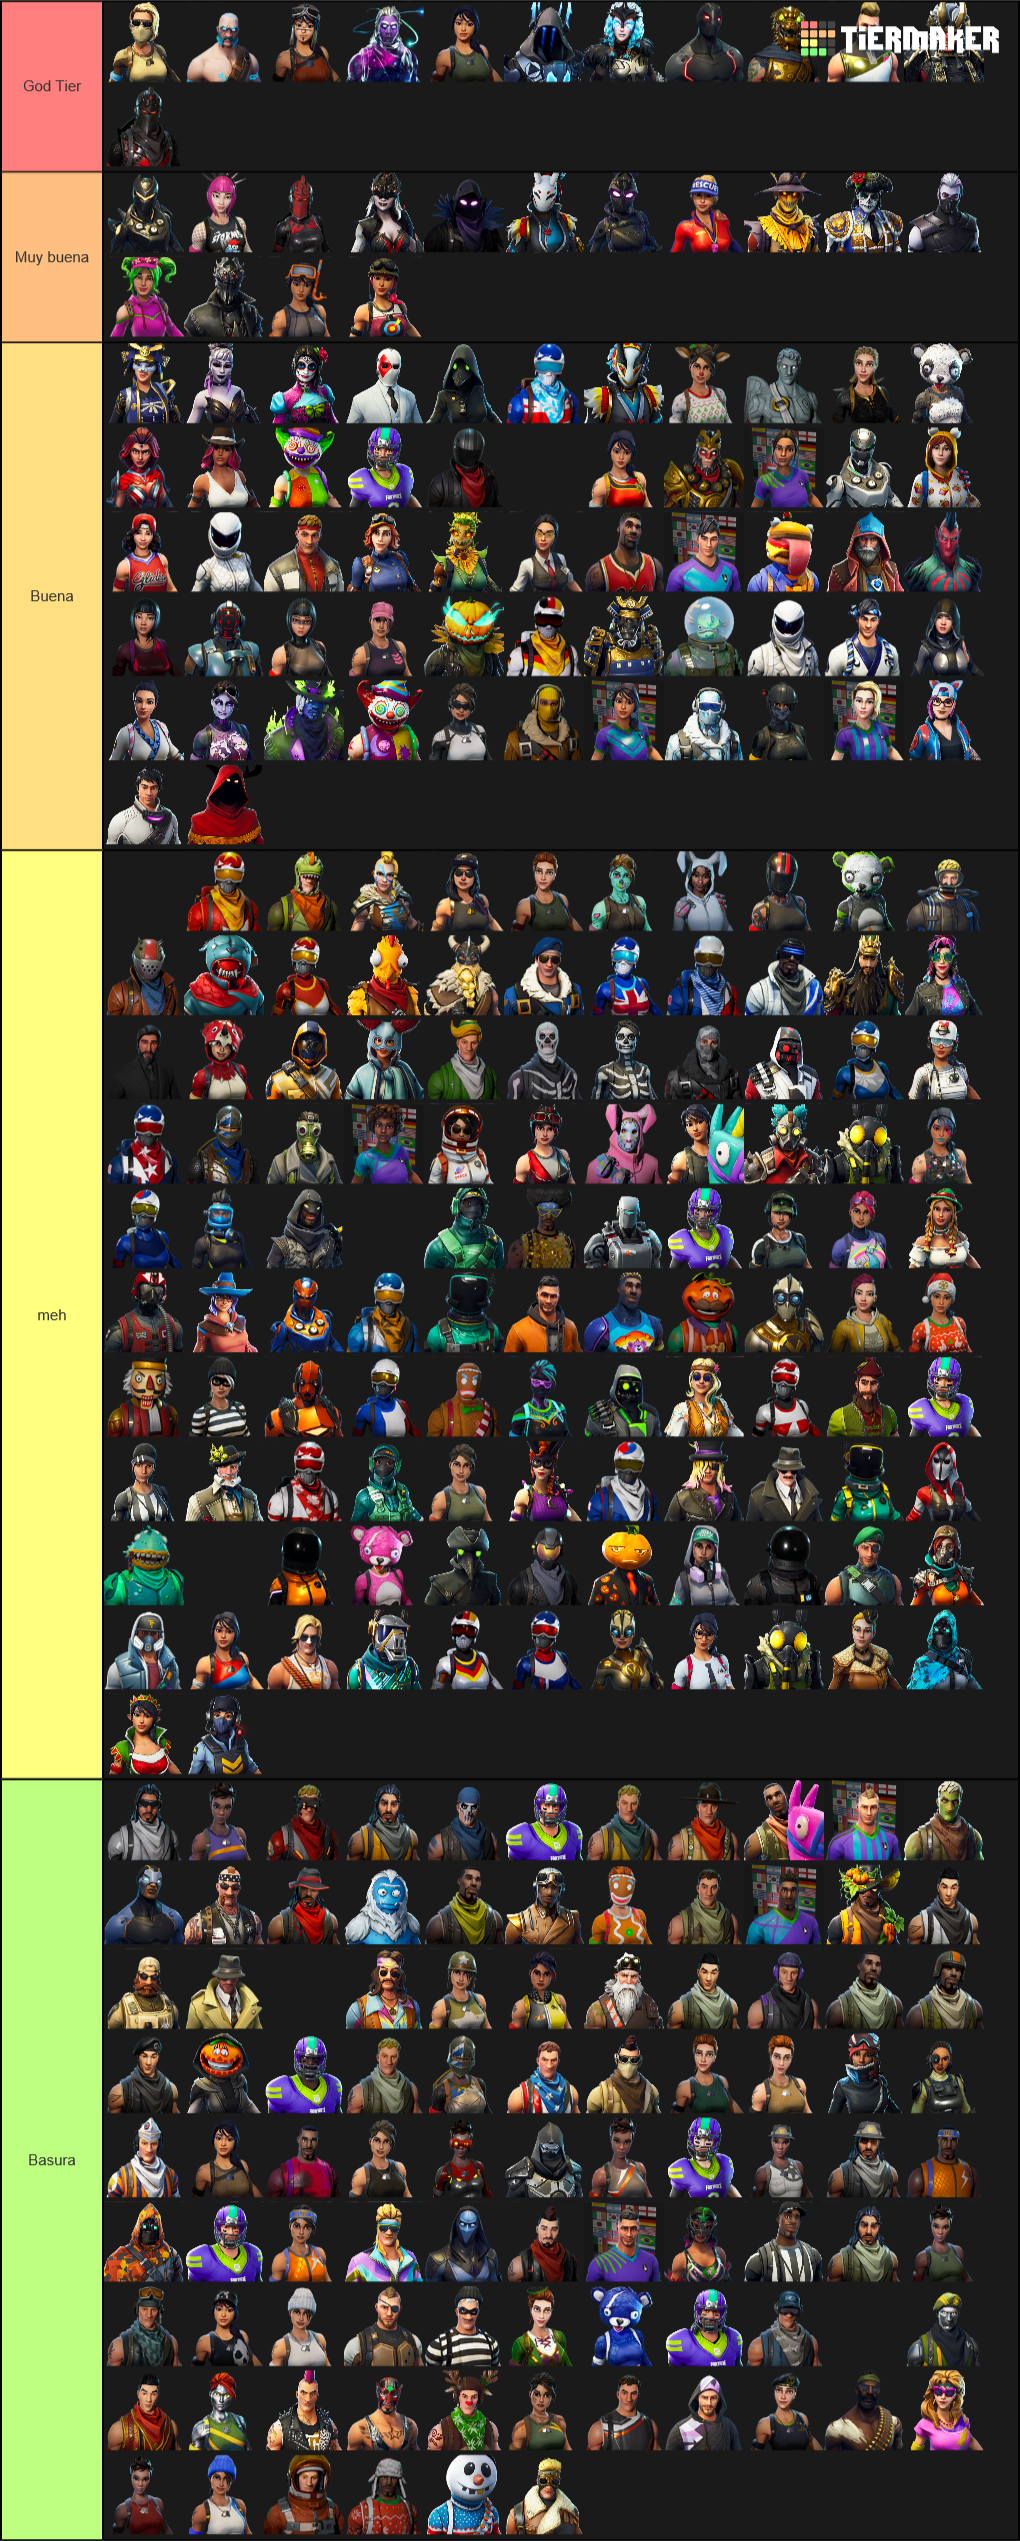 Create a Fortnite Skins (Outfits) Tier List - Tier Maker